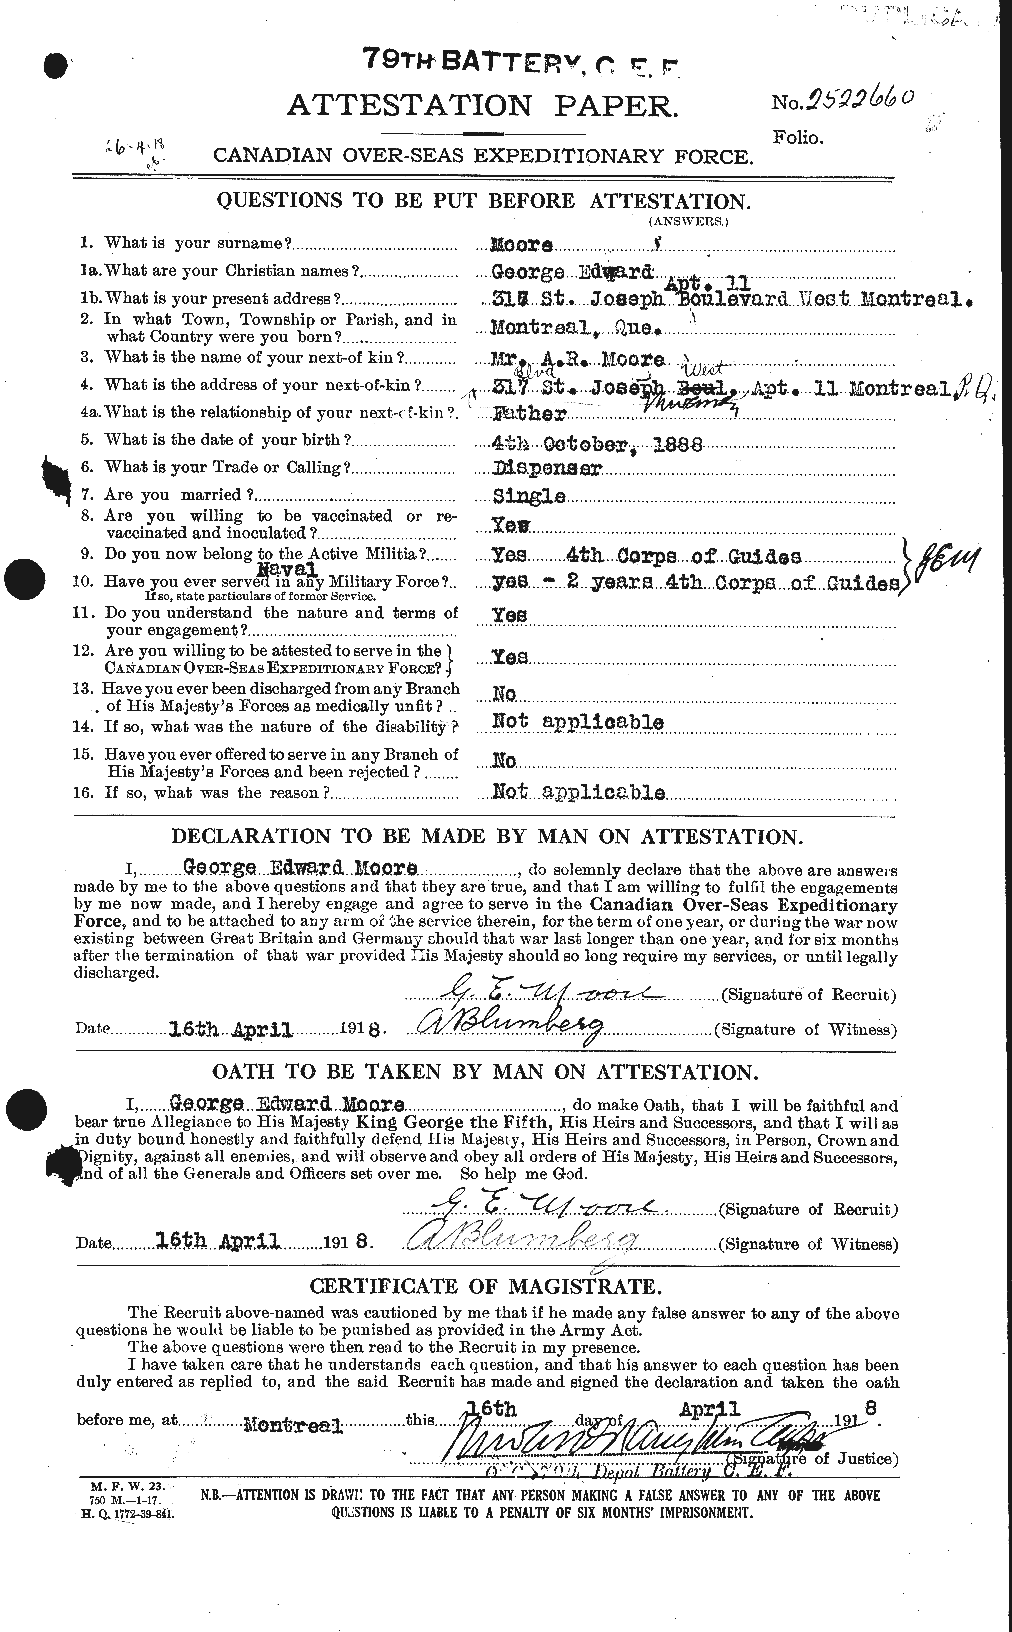 Personnel Records of the First World War - CEF 501997a